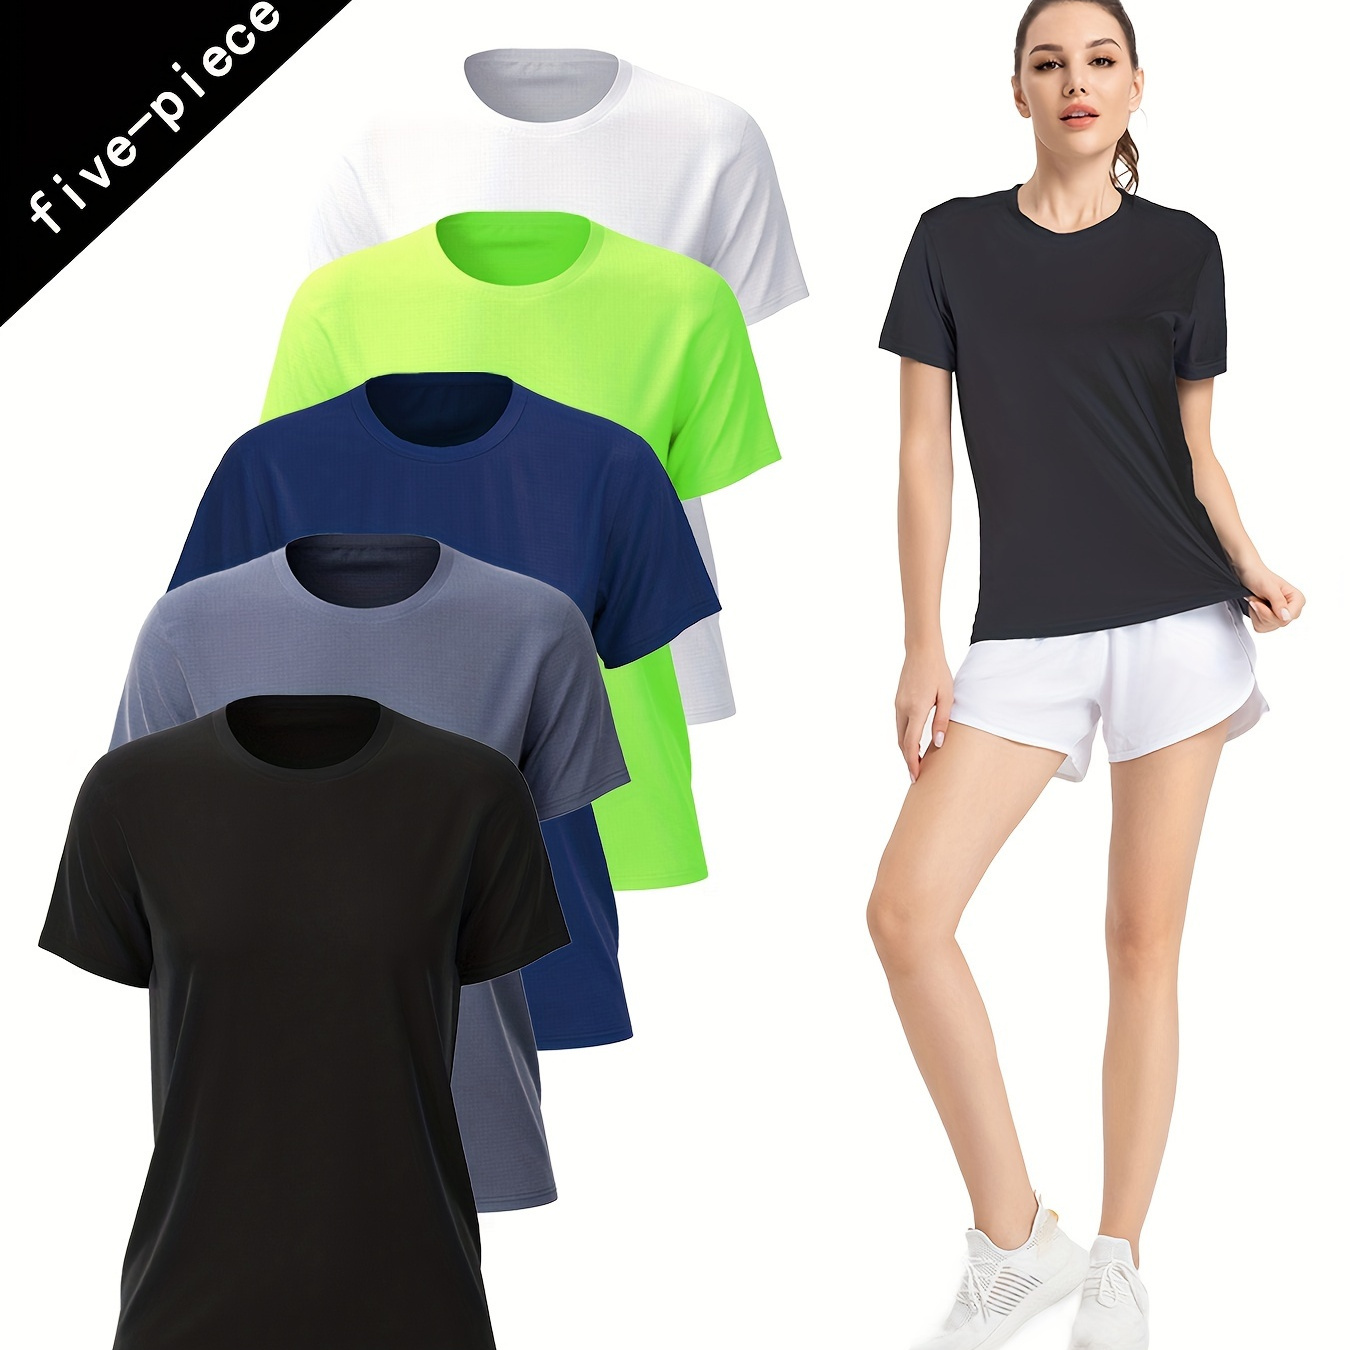 

5 Pcs Sports T-shirt, Quick-drying Breathable Running Fitness , Badminton Training Lightweight Top, Casual Round Neck Short Sleeve